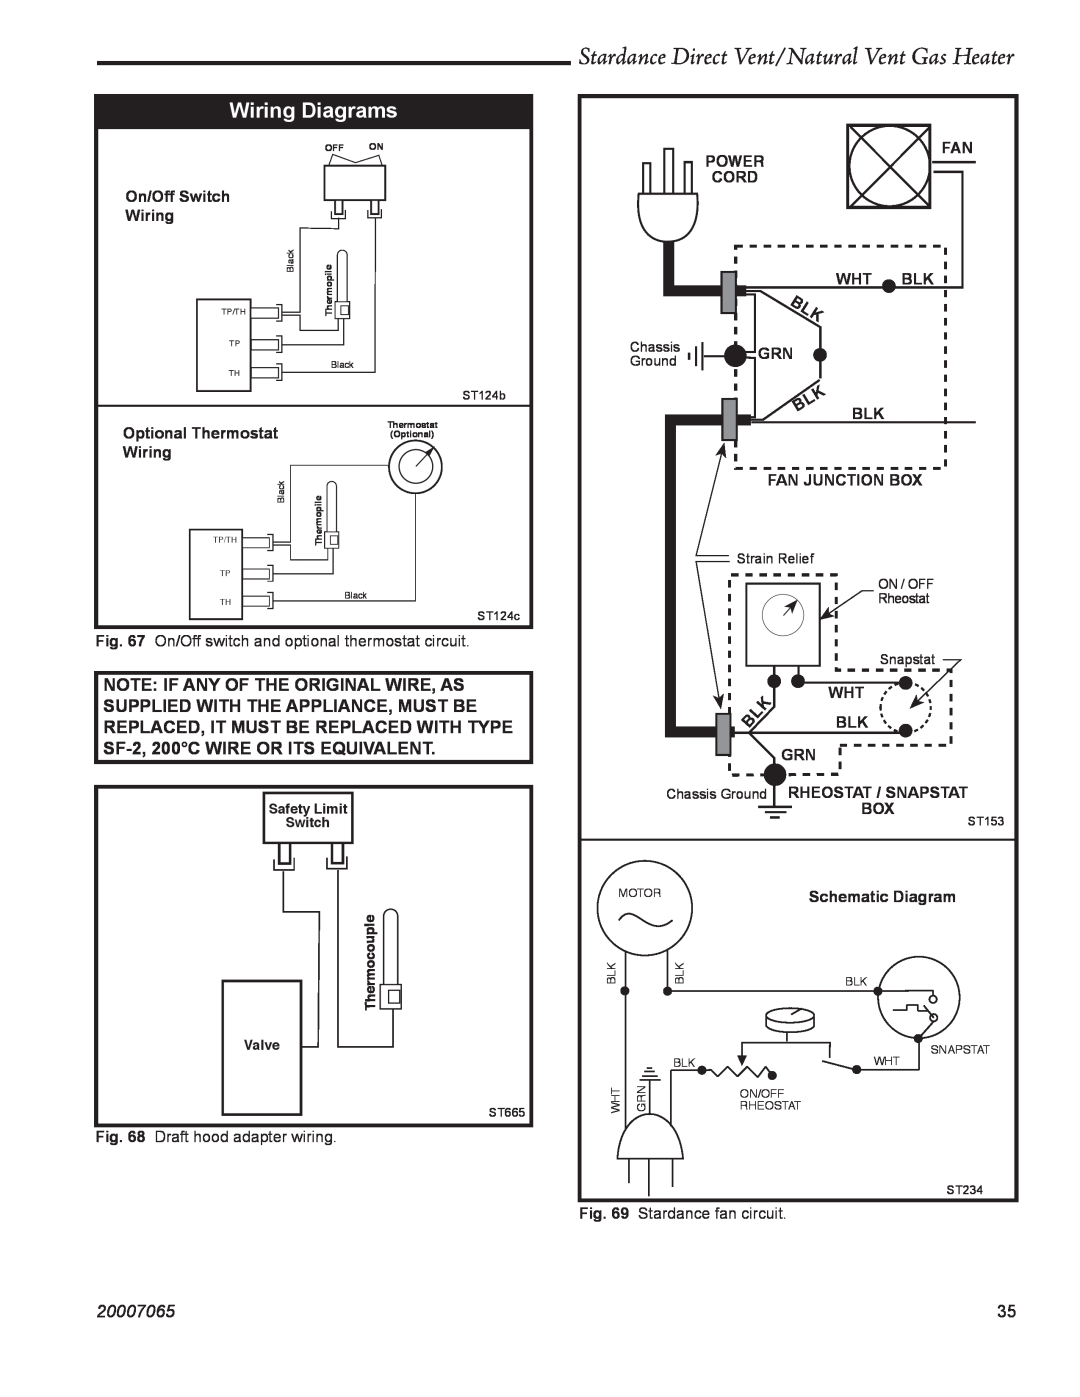 Vermont Casting SDV30 manual Wiring Diagrams, Stardance Direct Vent/Natural Vent Gas Heater, 20007065, Power 